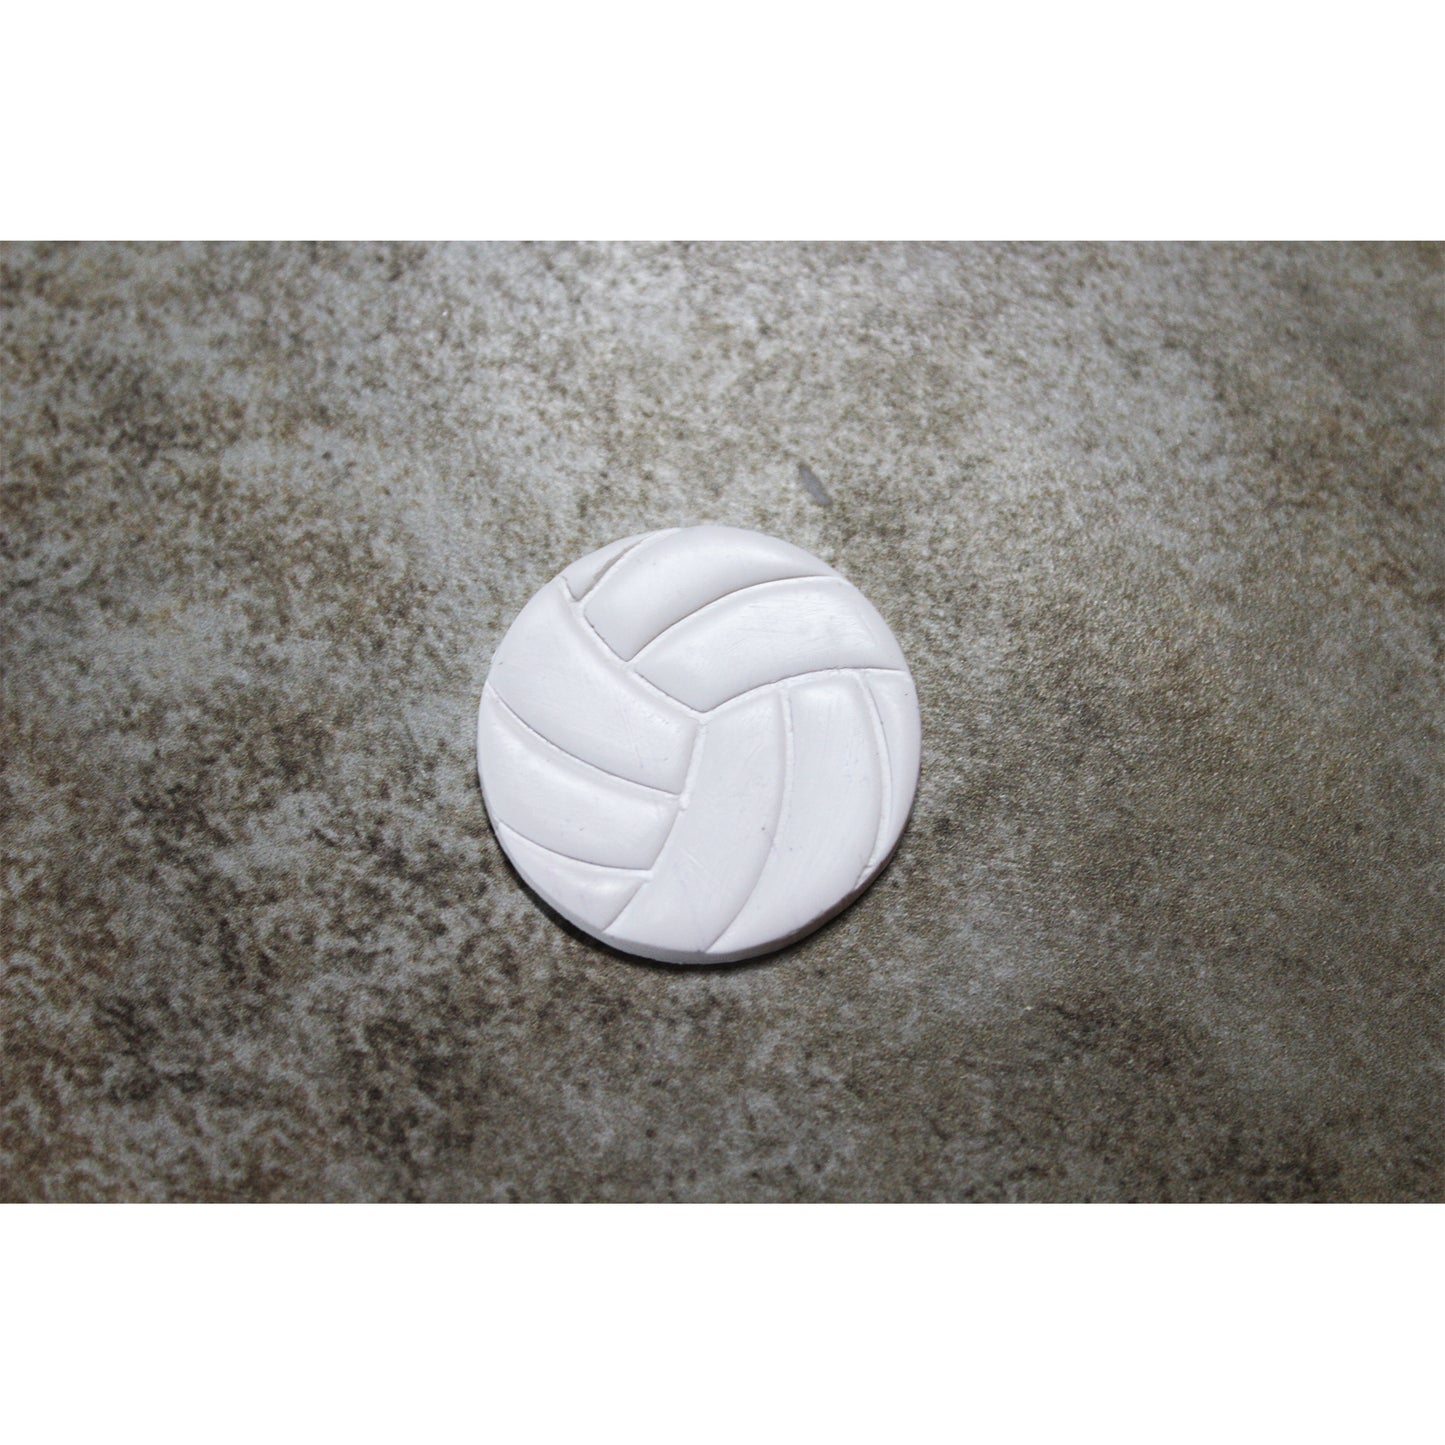 Volleyball Cookie Cutter/Clay Cutter